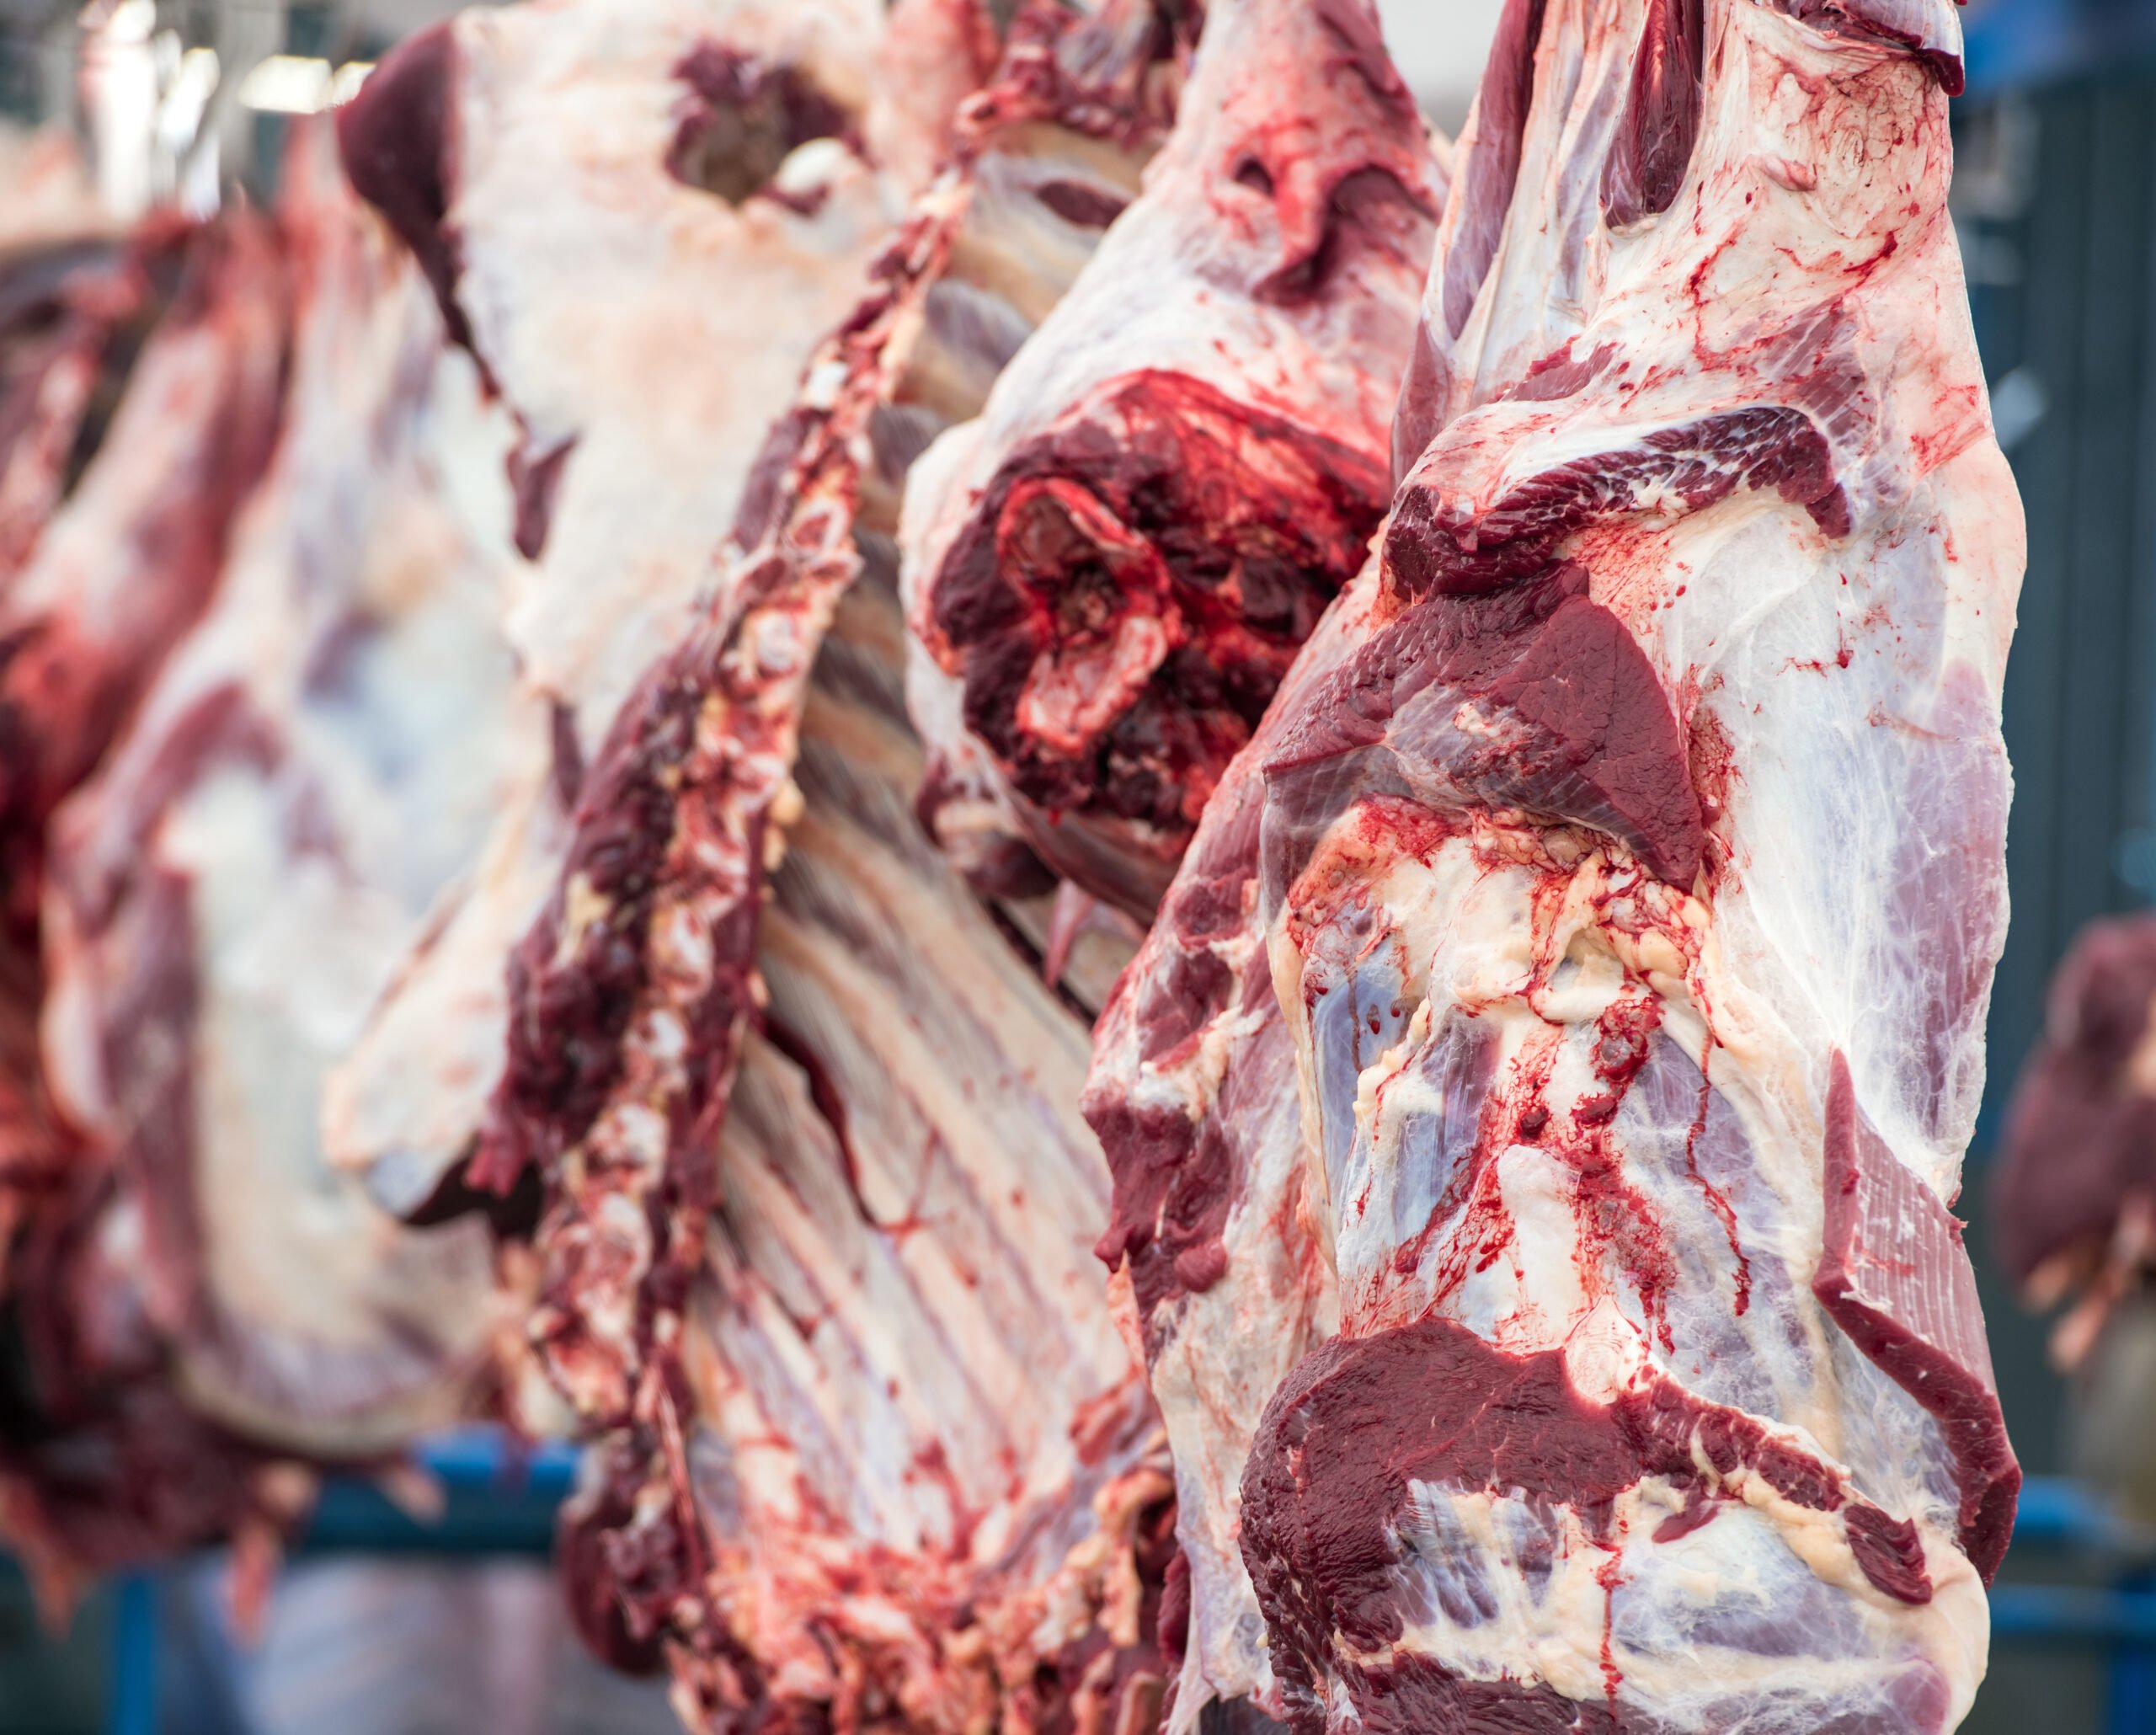 Learn More About Meatpacking and Slaughterhouses - FoodPrint